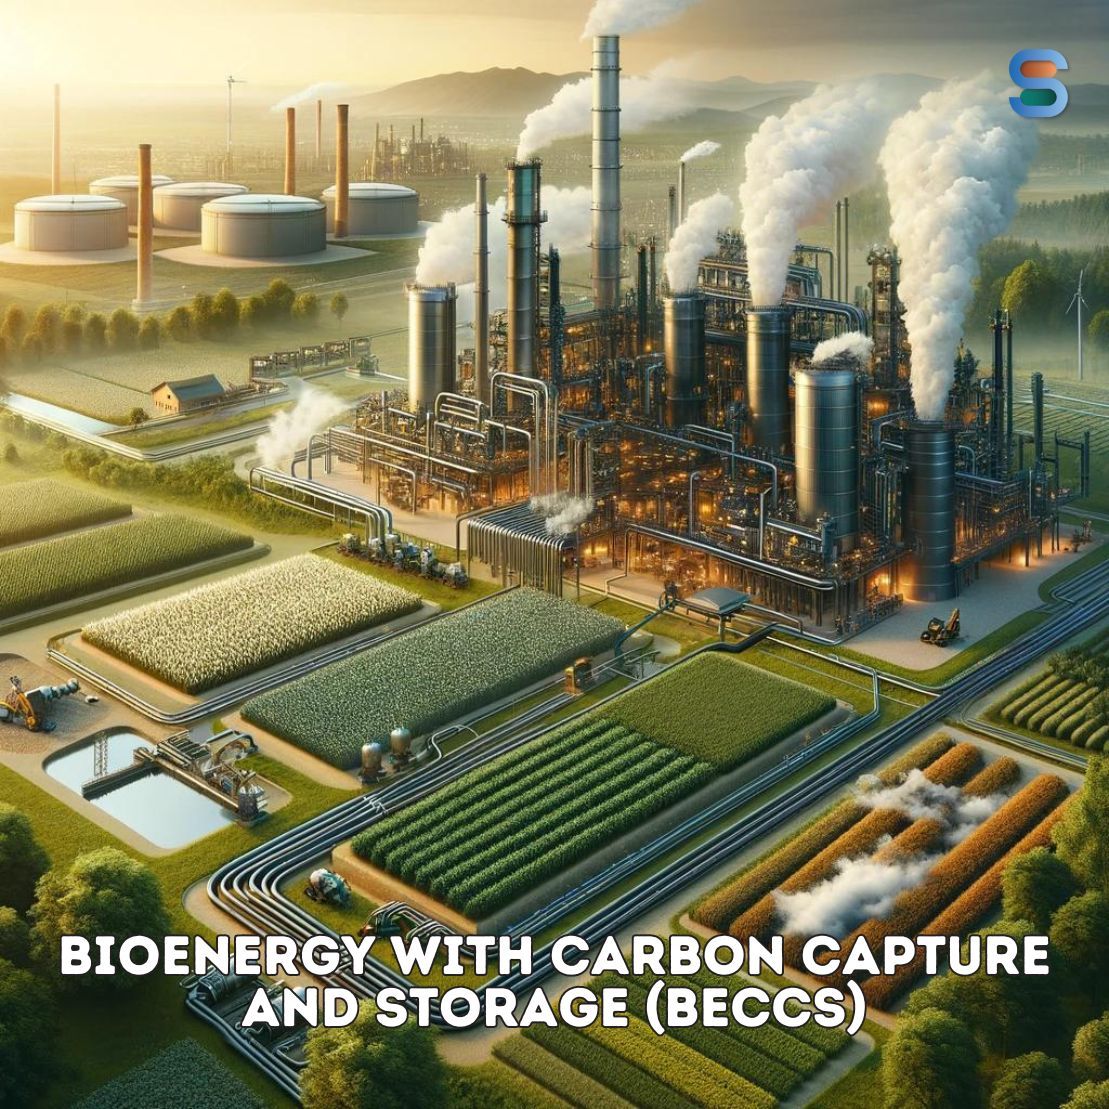 Exploring BECCS: Combining bioenergy with carbon capture, BECCS uses organic matter for energy while capturing CO2, reducing fossil fuel reliance and potentially achieving negative emissions. Despite challenges, it promises a sustainable future. #ClimateAction #BECCS #ClimateTech